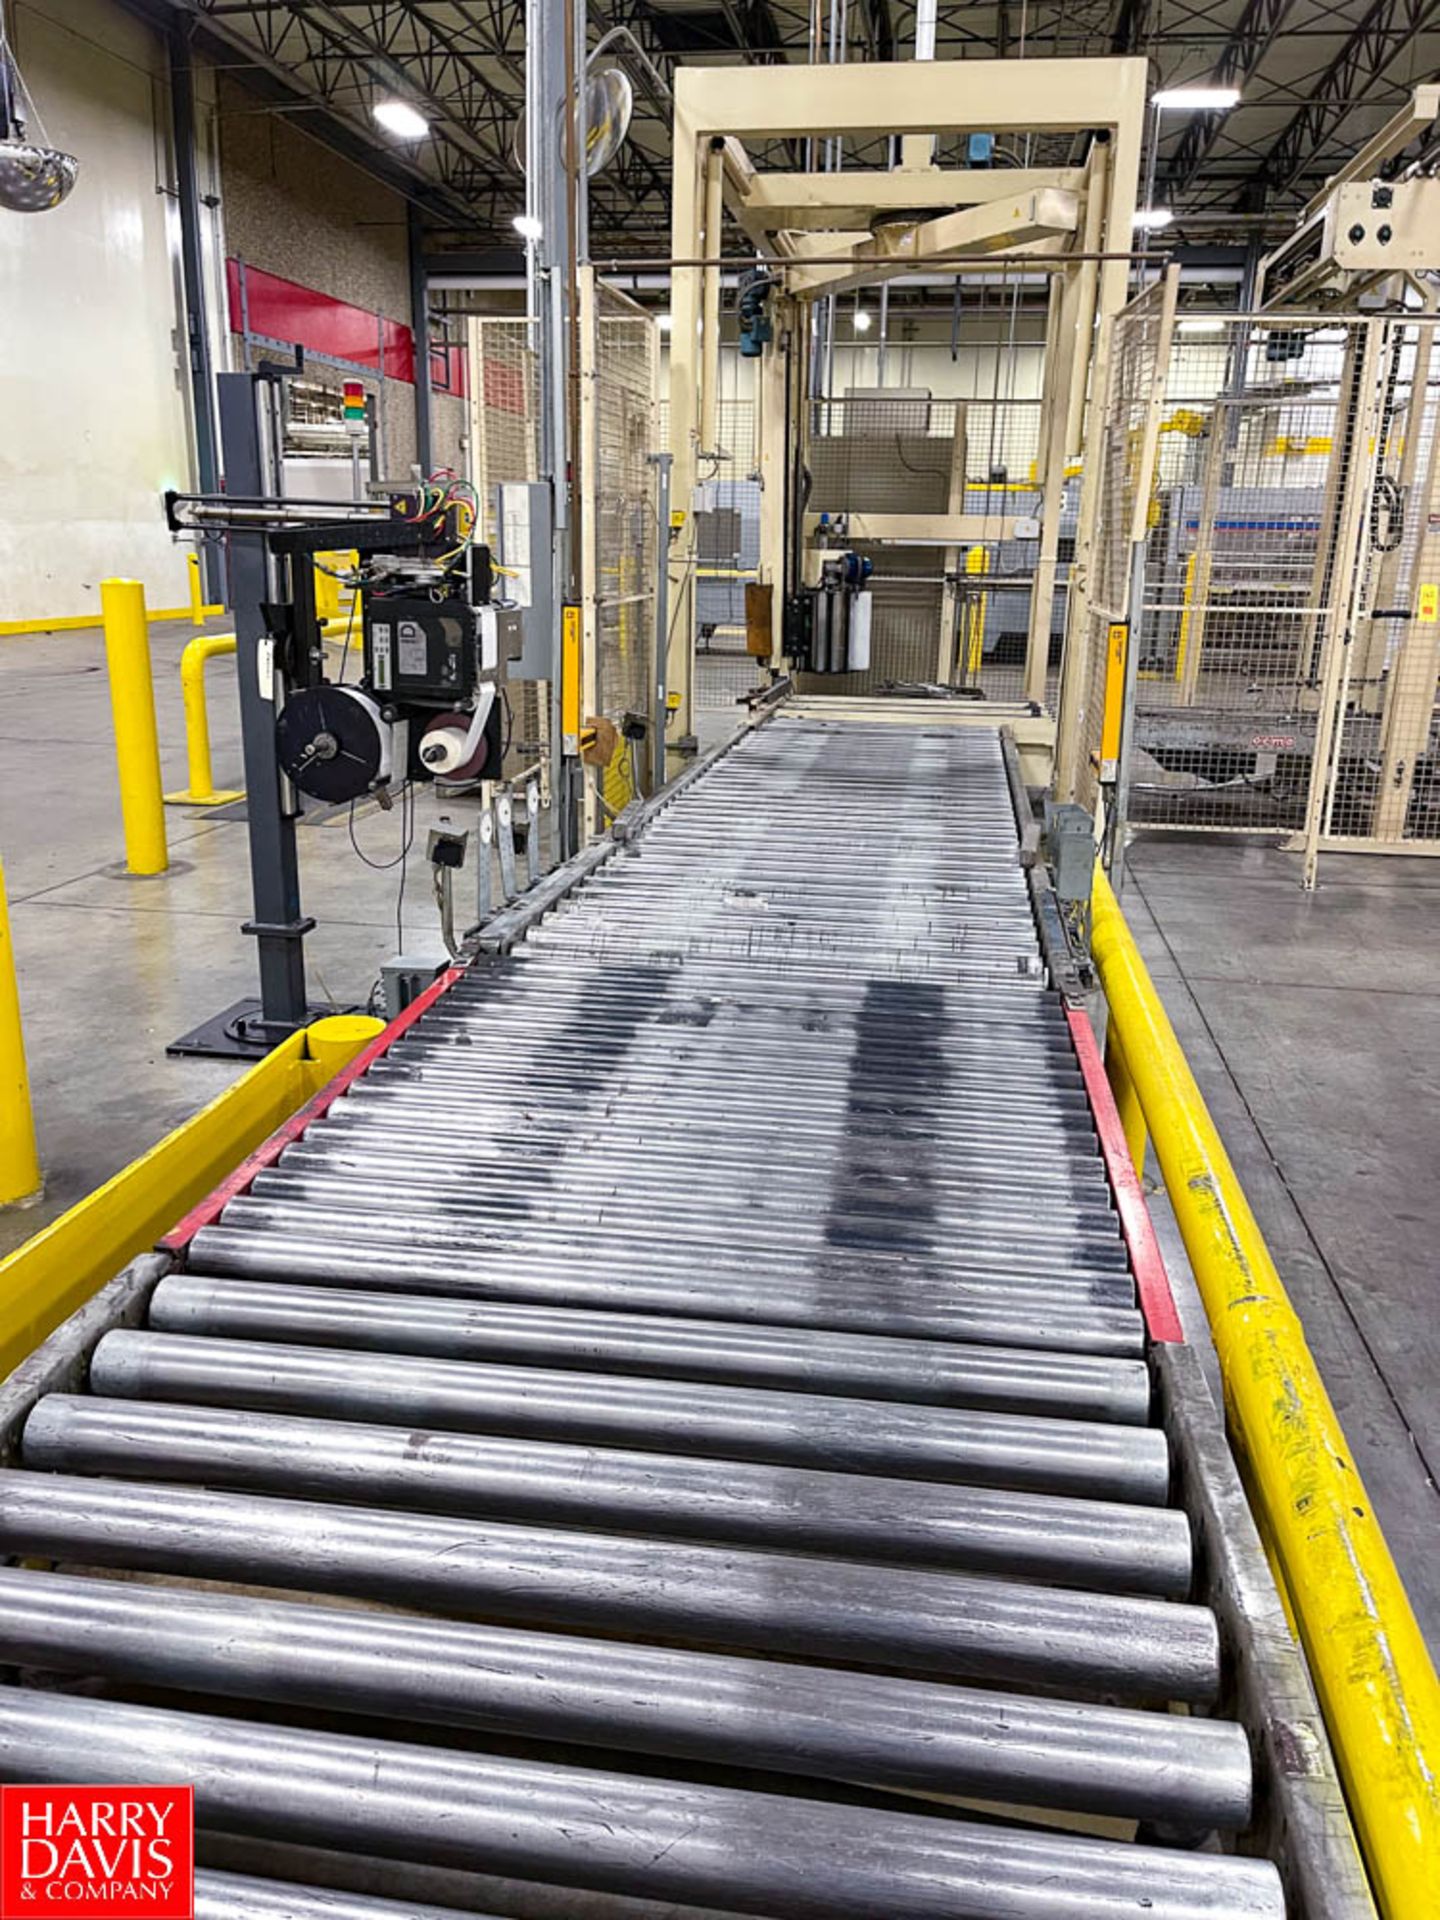 OCME Stretch Pallet Wrapper with Allen Bradley Controls, and Outfeed Roller Conveyor Model PIERI - Image 2 of 3